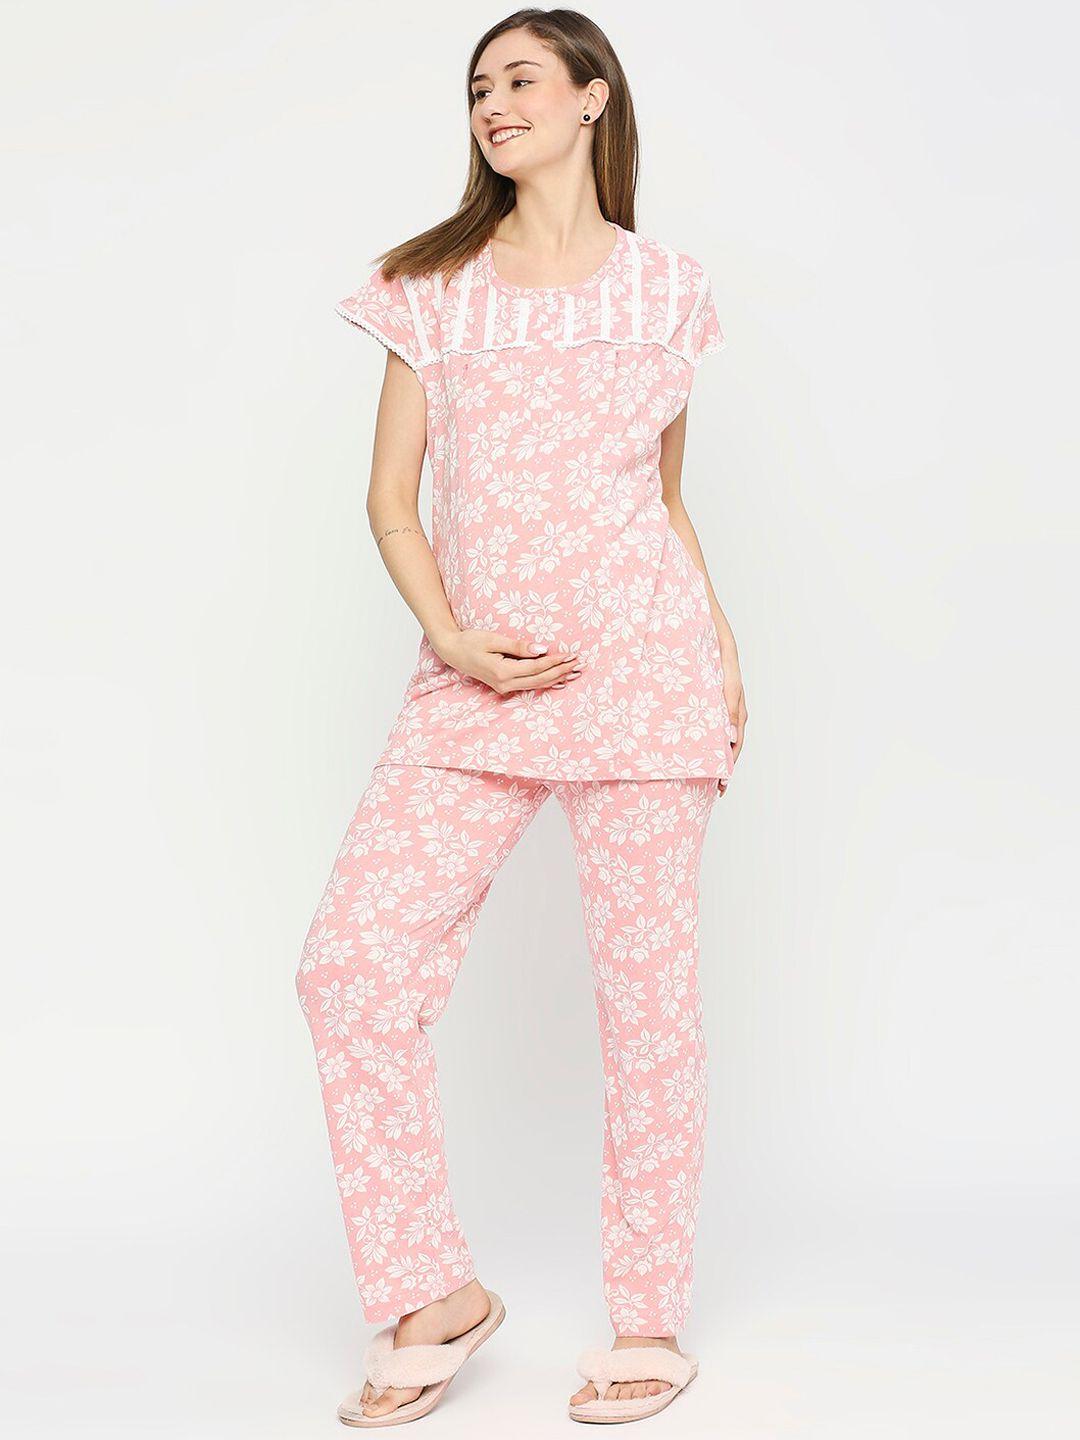 meemee floral printed pure cotton maternity night suit